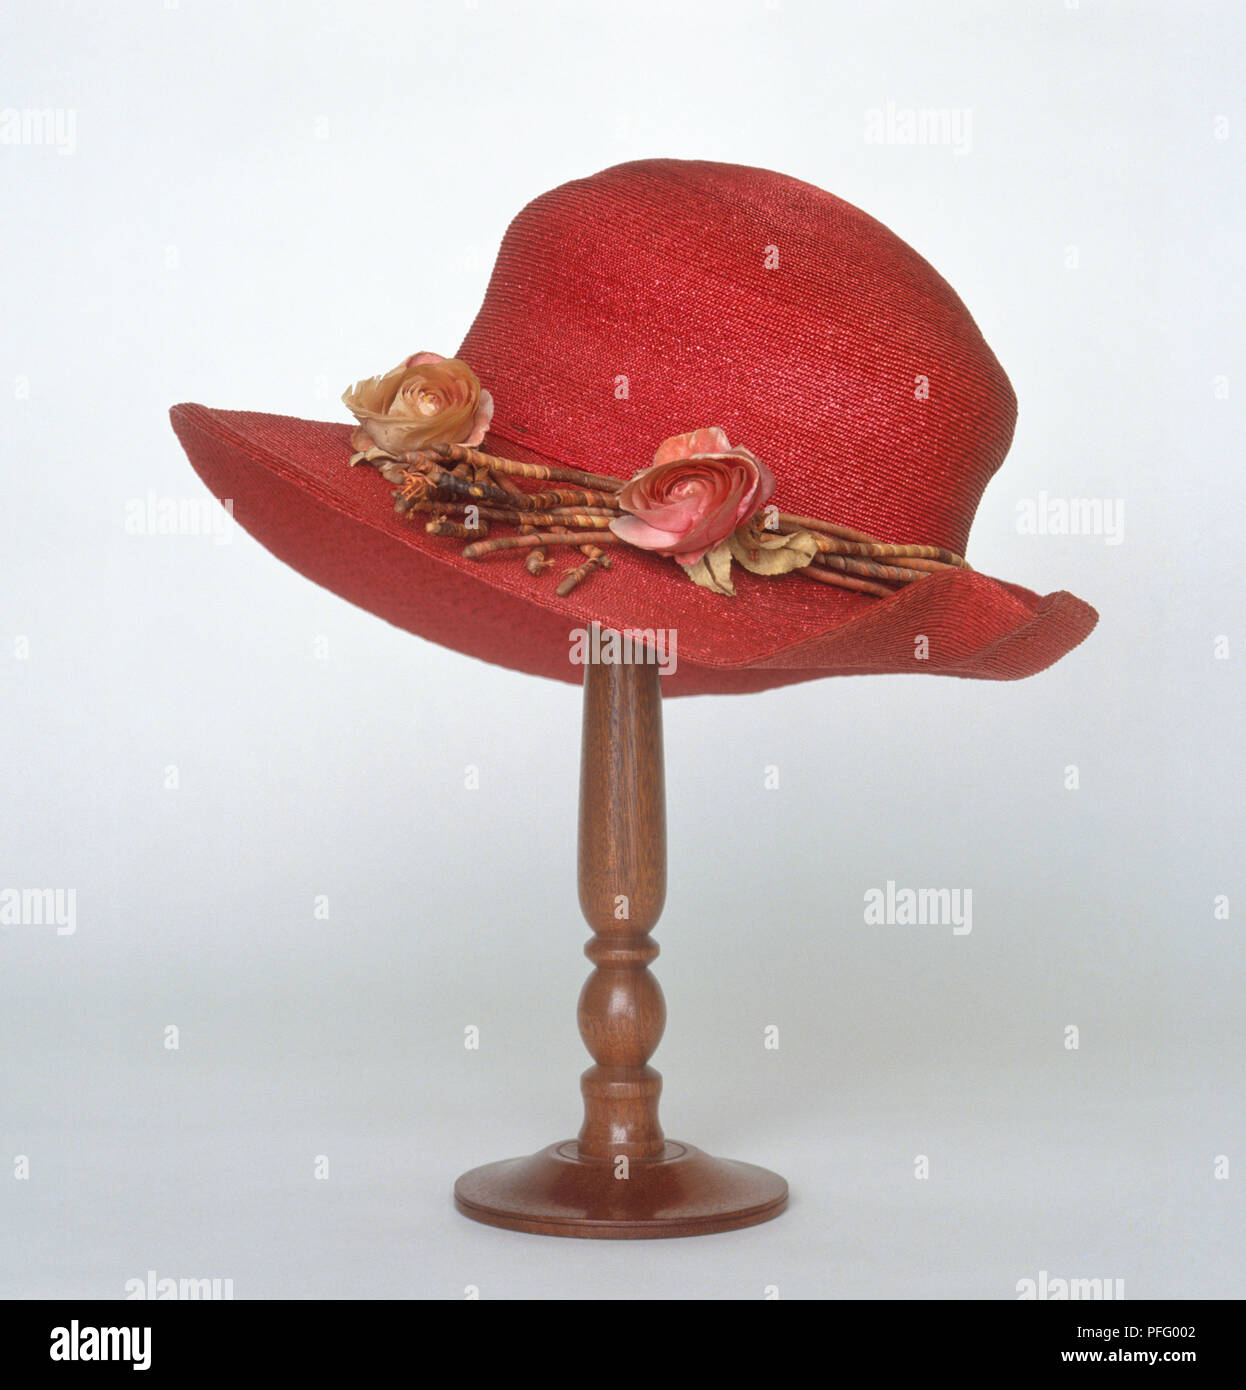 A red straw hat with decorative flowers, on hatstand Stock Photo